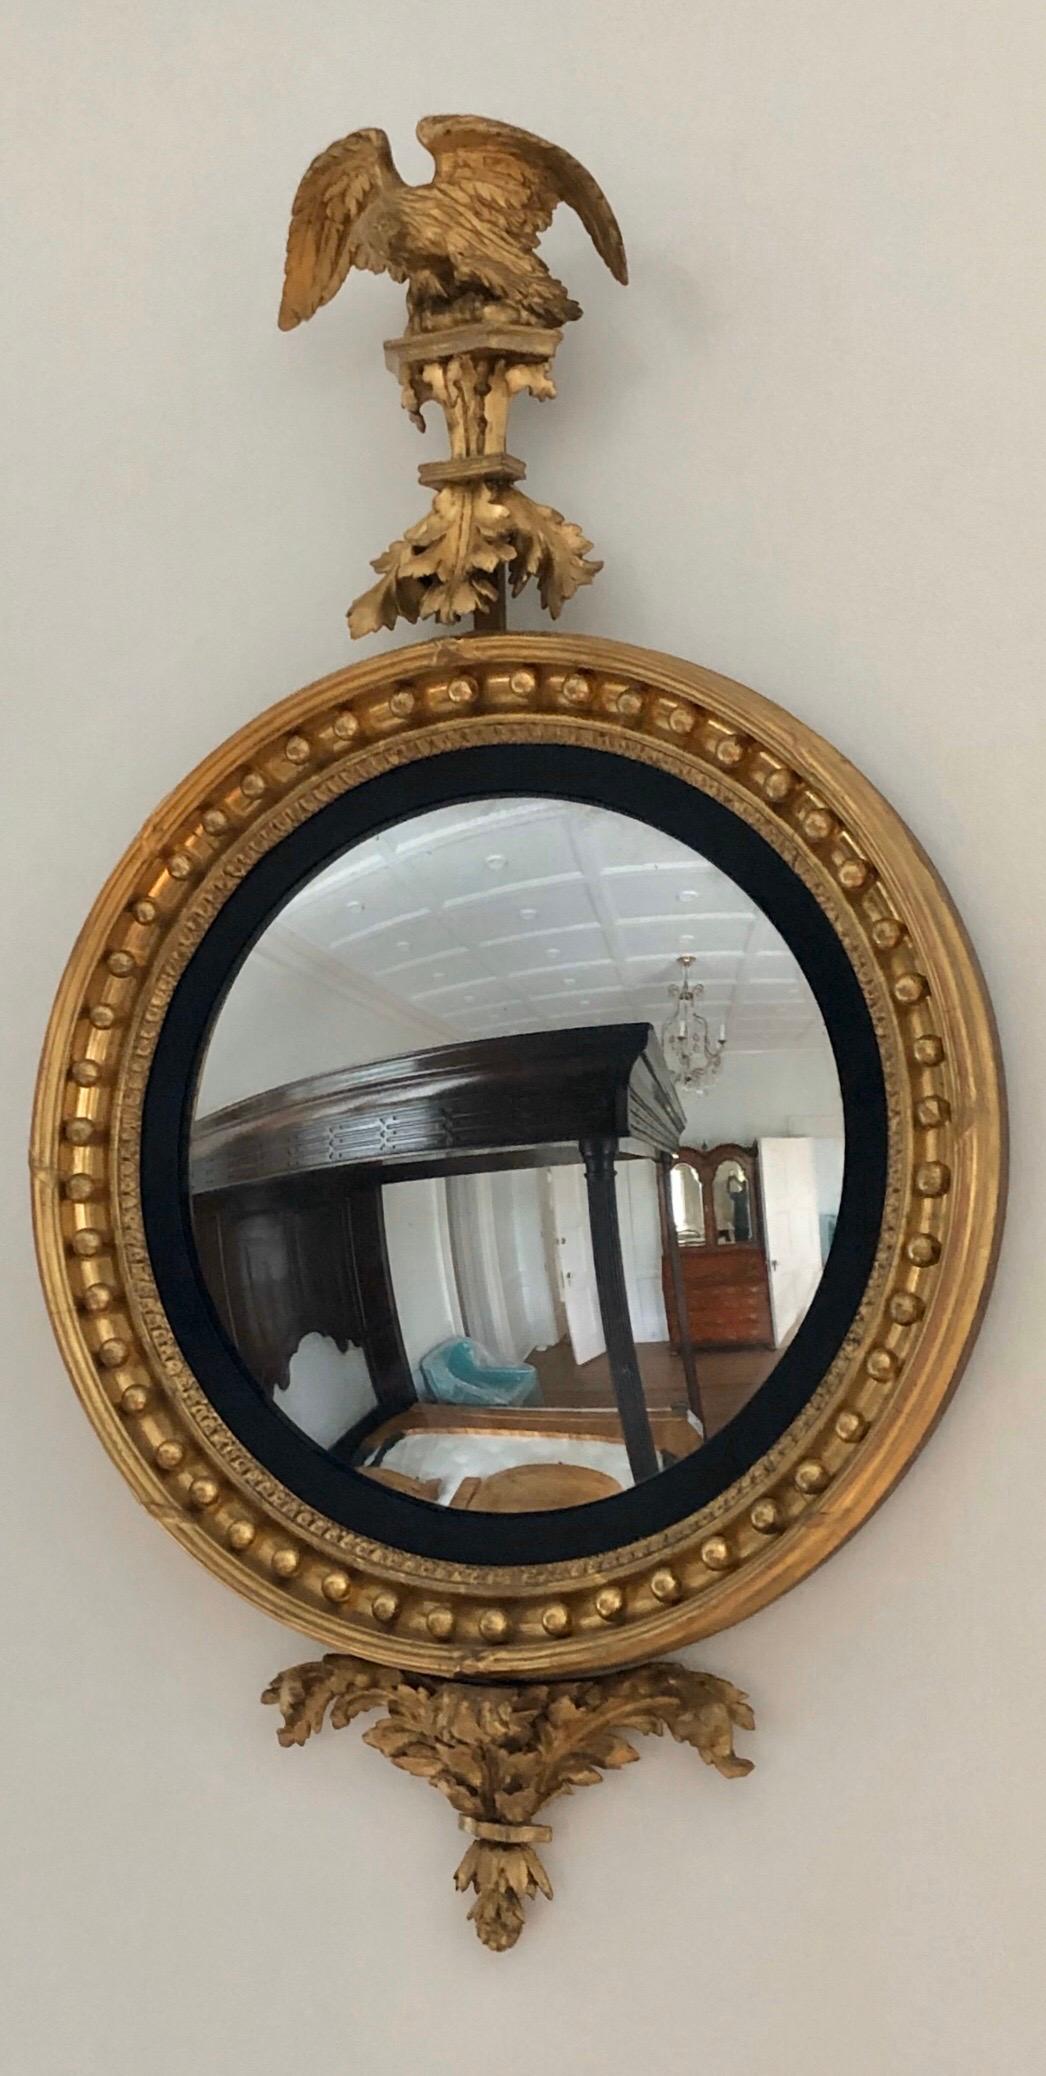 This Regal period Regency giltwood bulls eye mirror has an giltwood carved eagle perched on a giltwood foliate plinth. The eagle is cresting over a convex mirror with gilt frame surrounded by ball decoration with an ebonized slip. The convex is